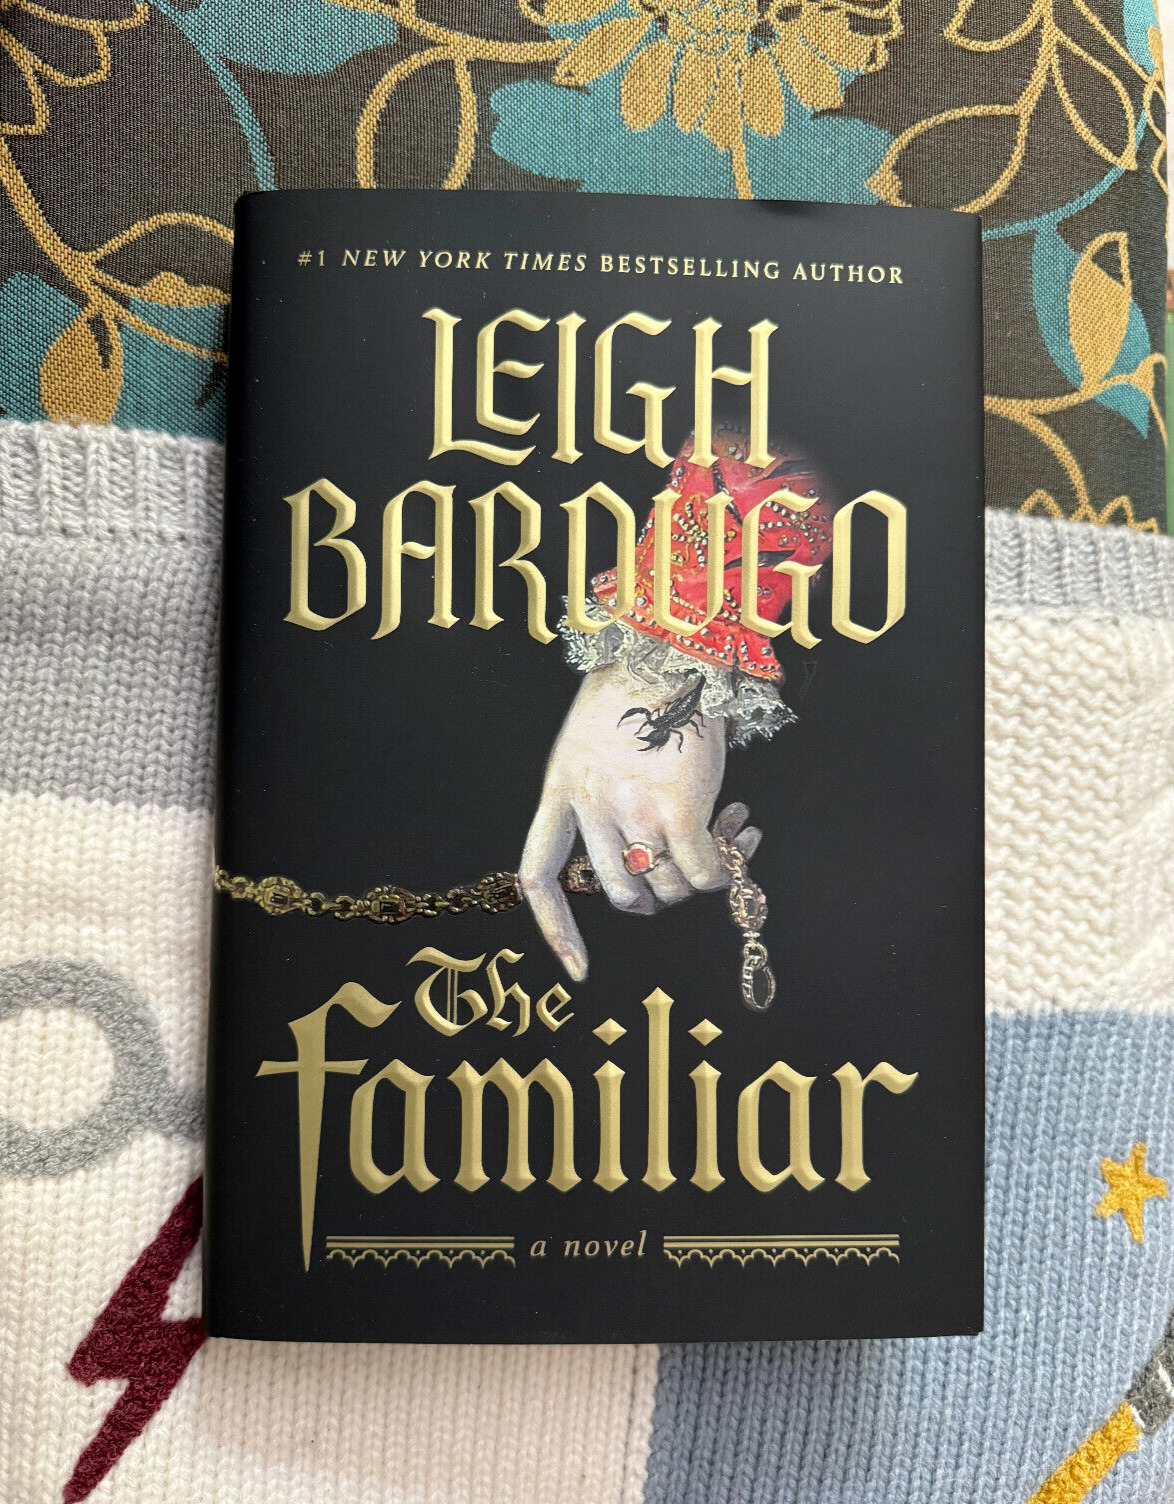 The Familiar - 1st/1st Hardcover - Leigh Bardugo - First Edition 1st Print - NEW